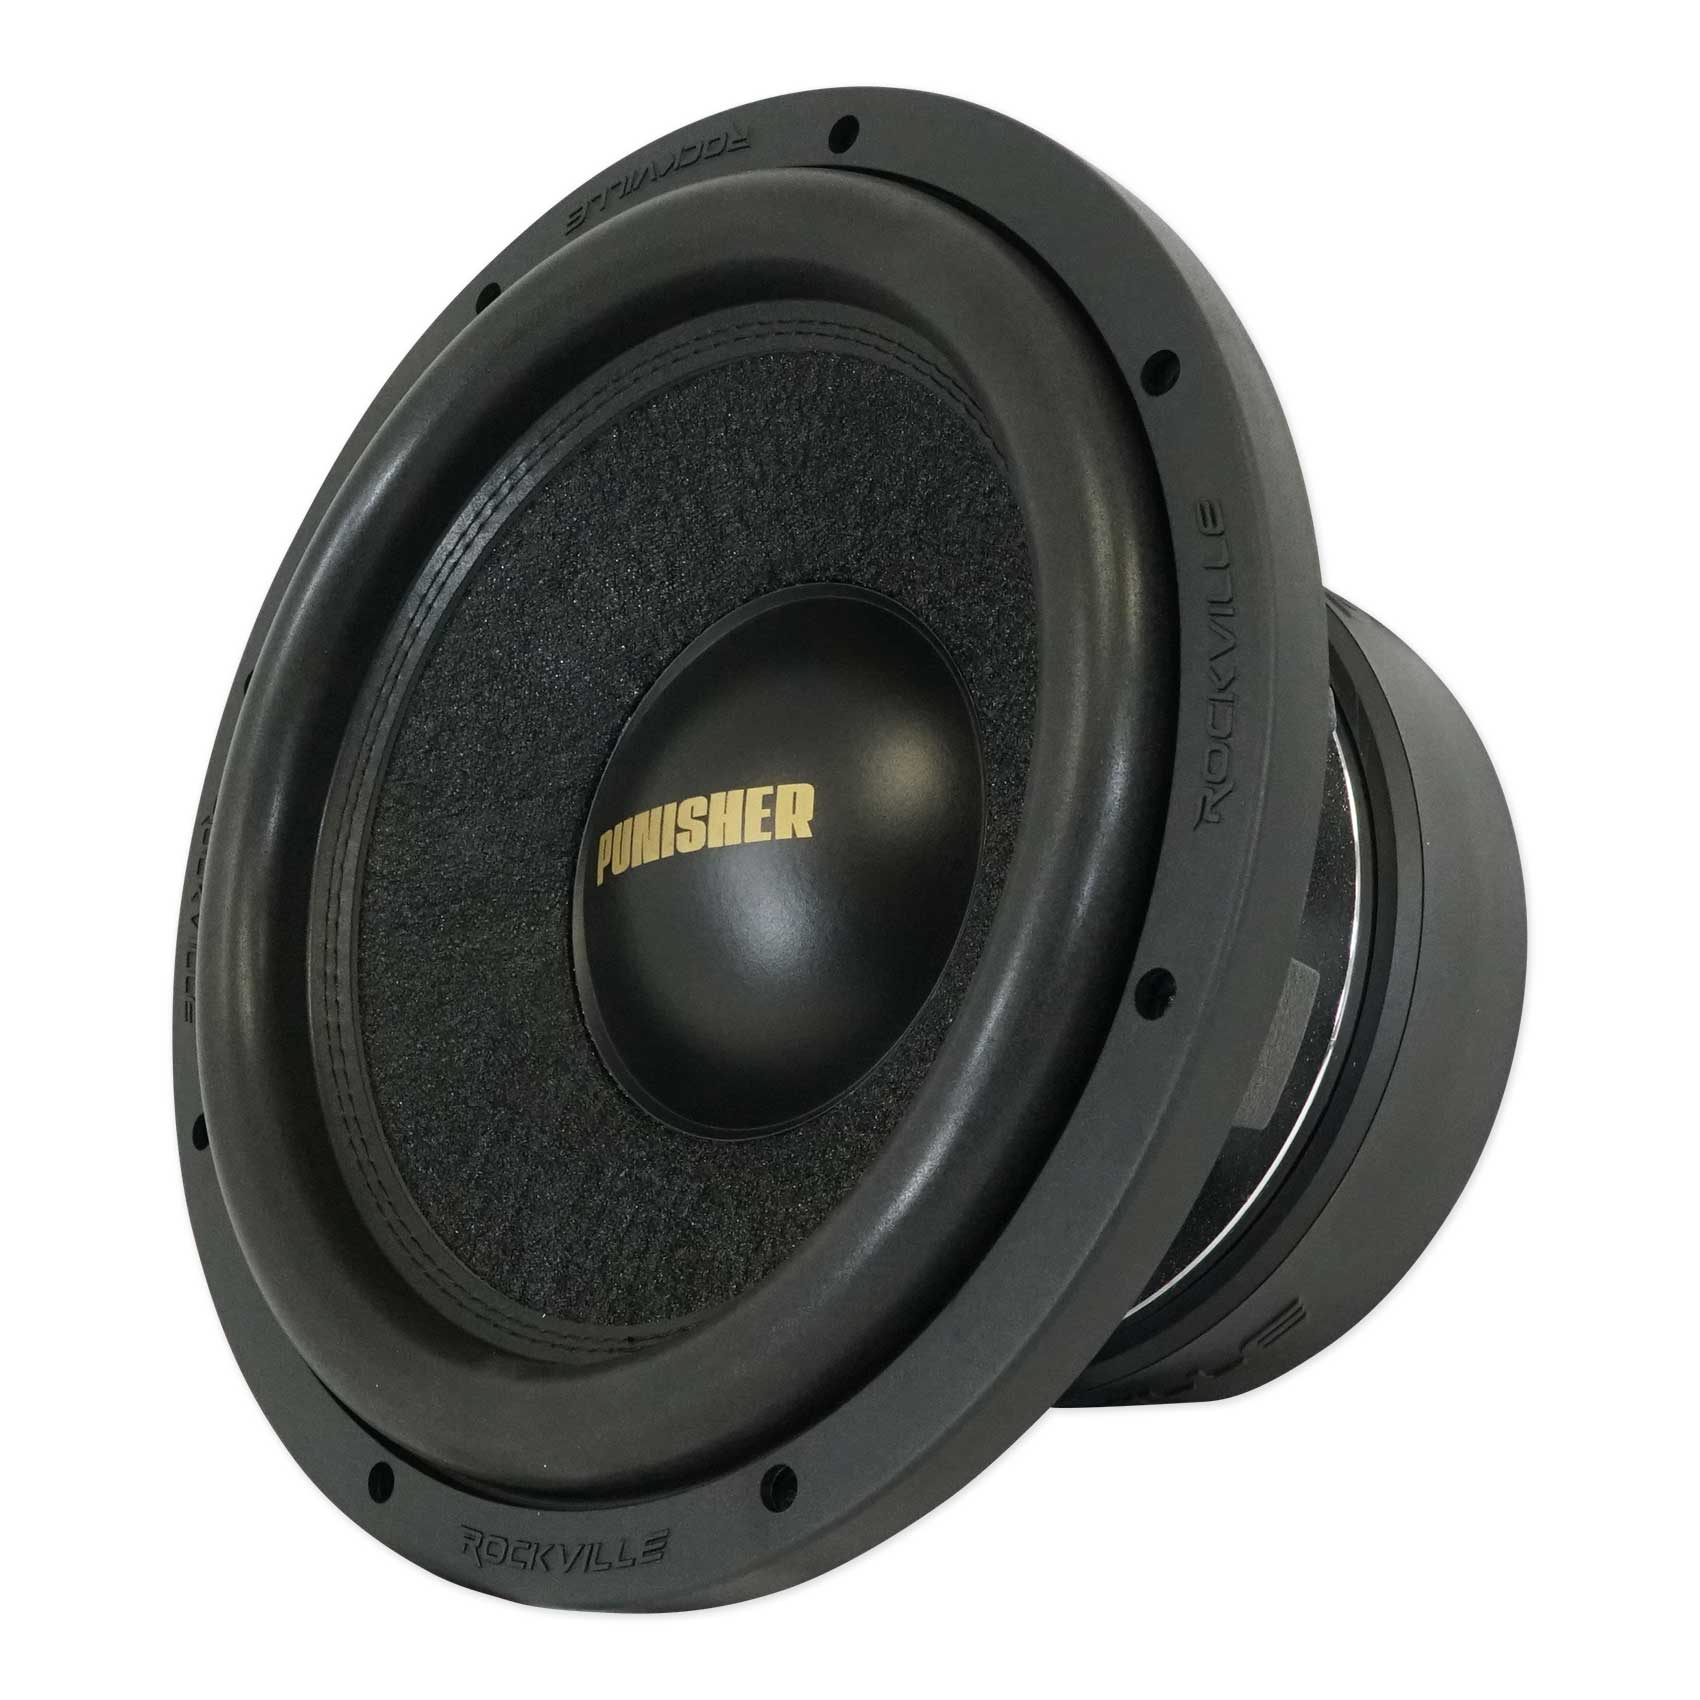 Rockville Punisher 12D1 12" 5600w Peak Car Audio Competition Subwoofer Dual 1-Ohm Sub 1400w RMS CEA Rated - image 1 of 11